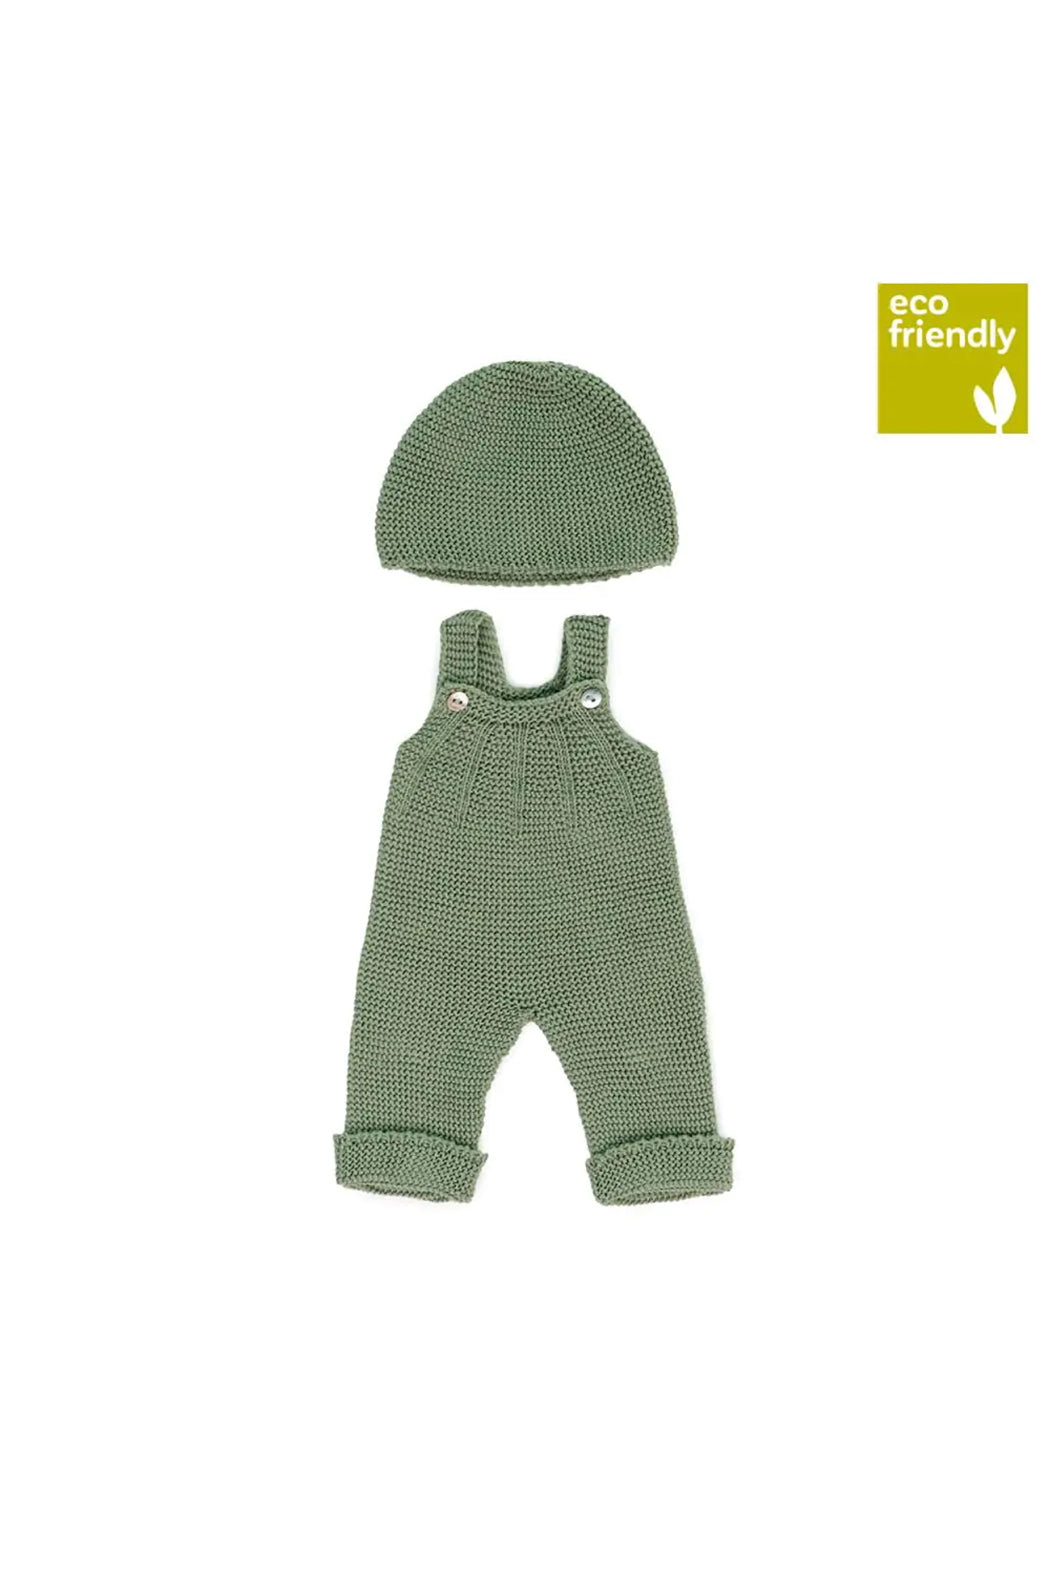 Miniland 15" Doll Knitted Clothes - Beanie + Hat